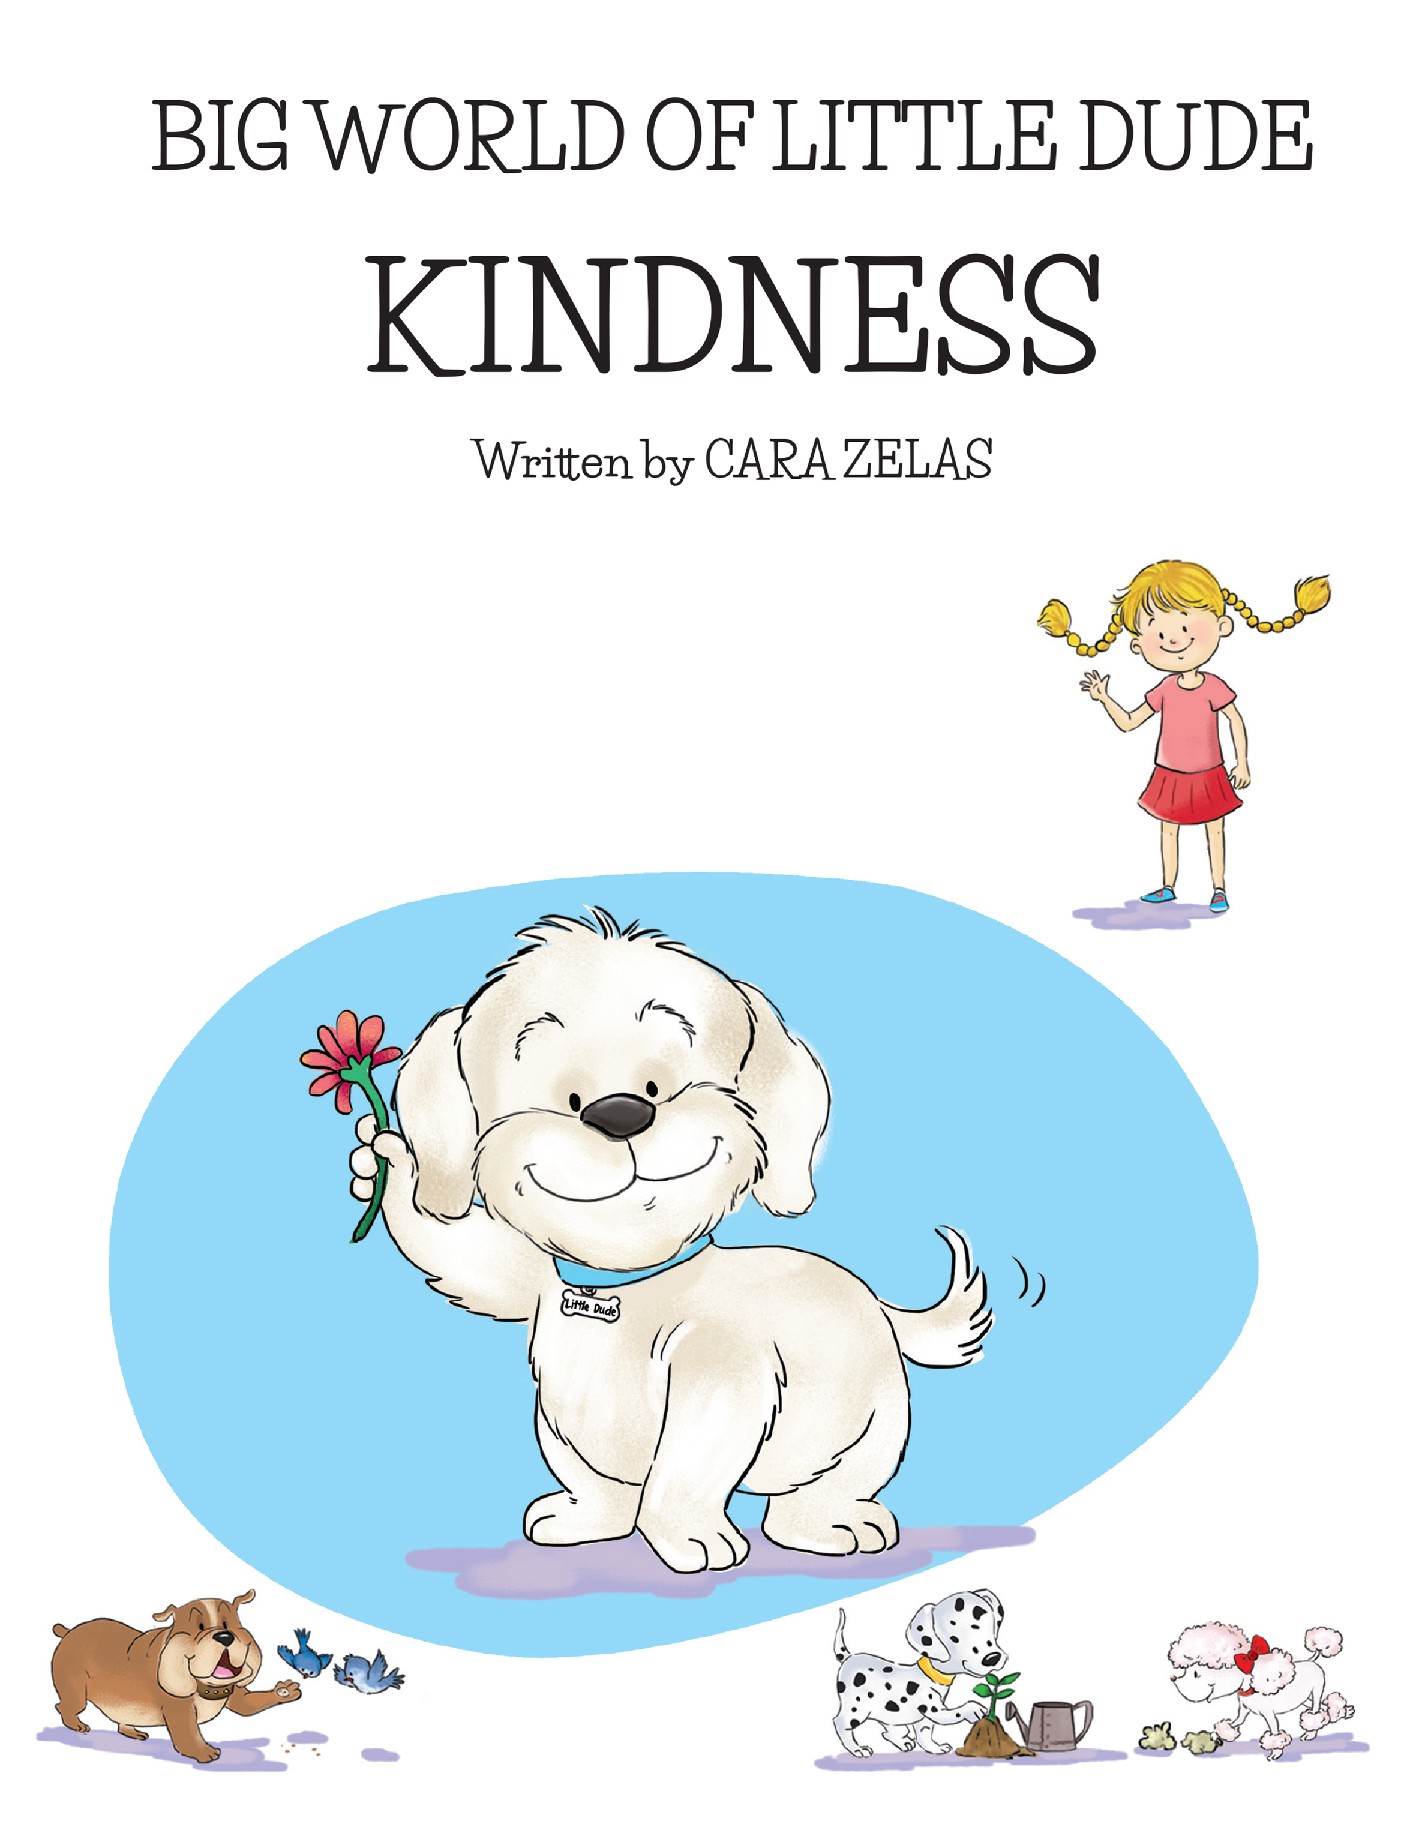 Sunday Story Time with Cara Zelas (author of The Big World of Little Dude: Kindness)